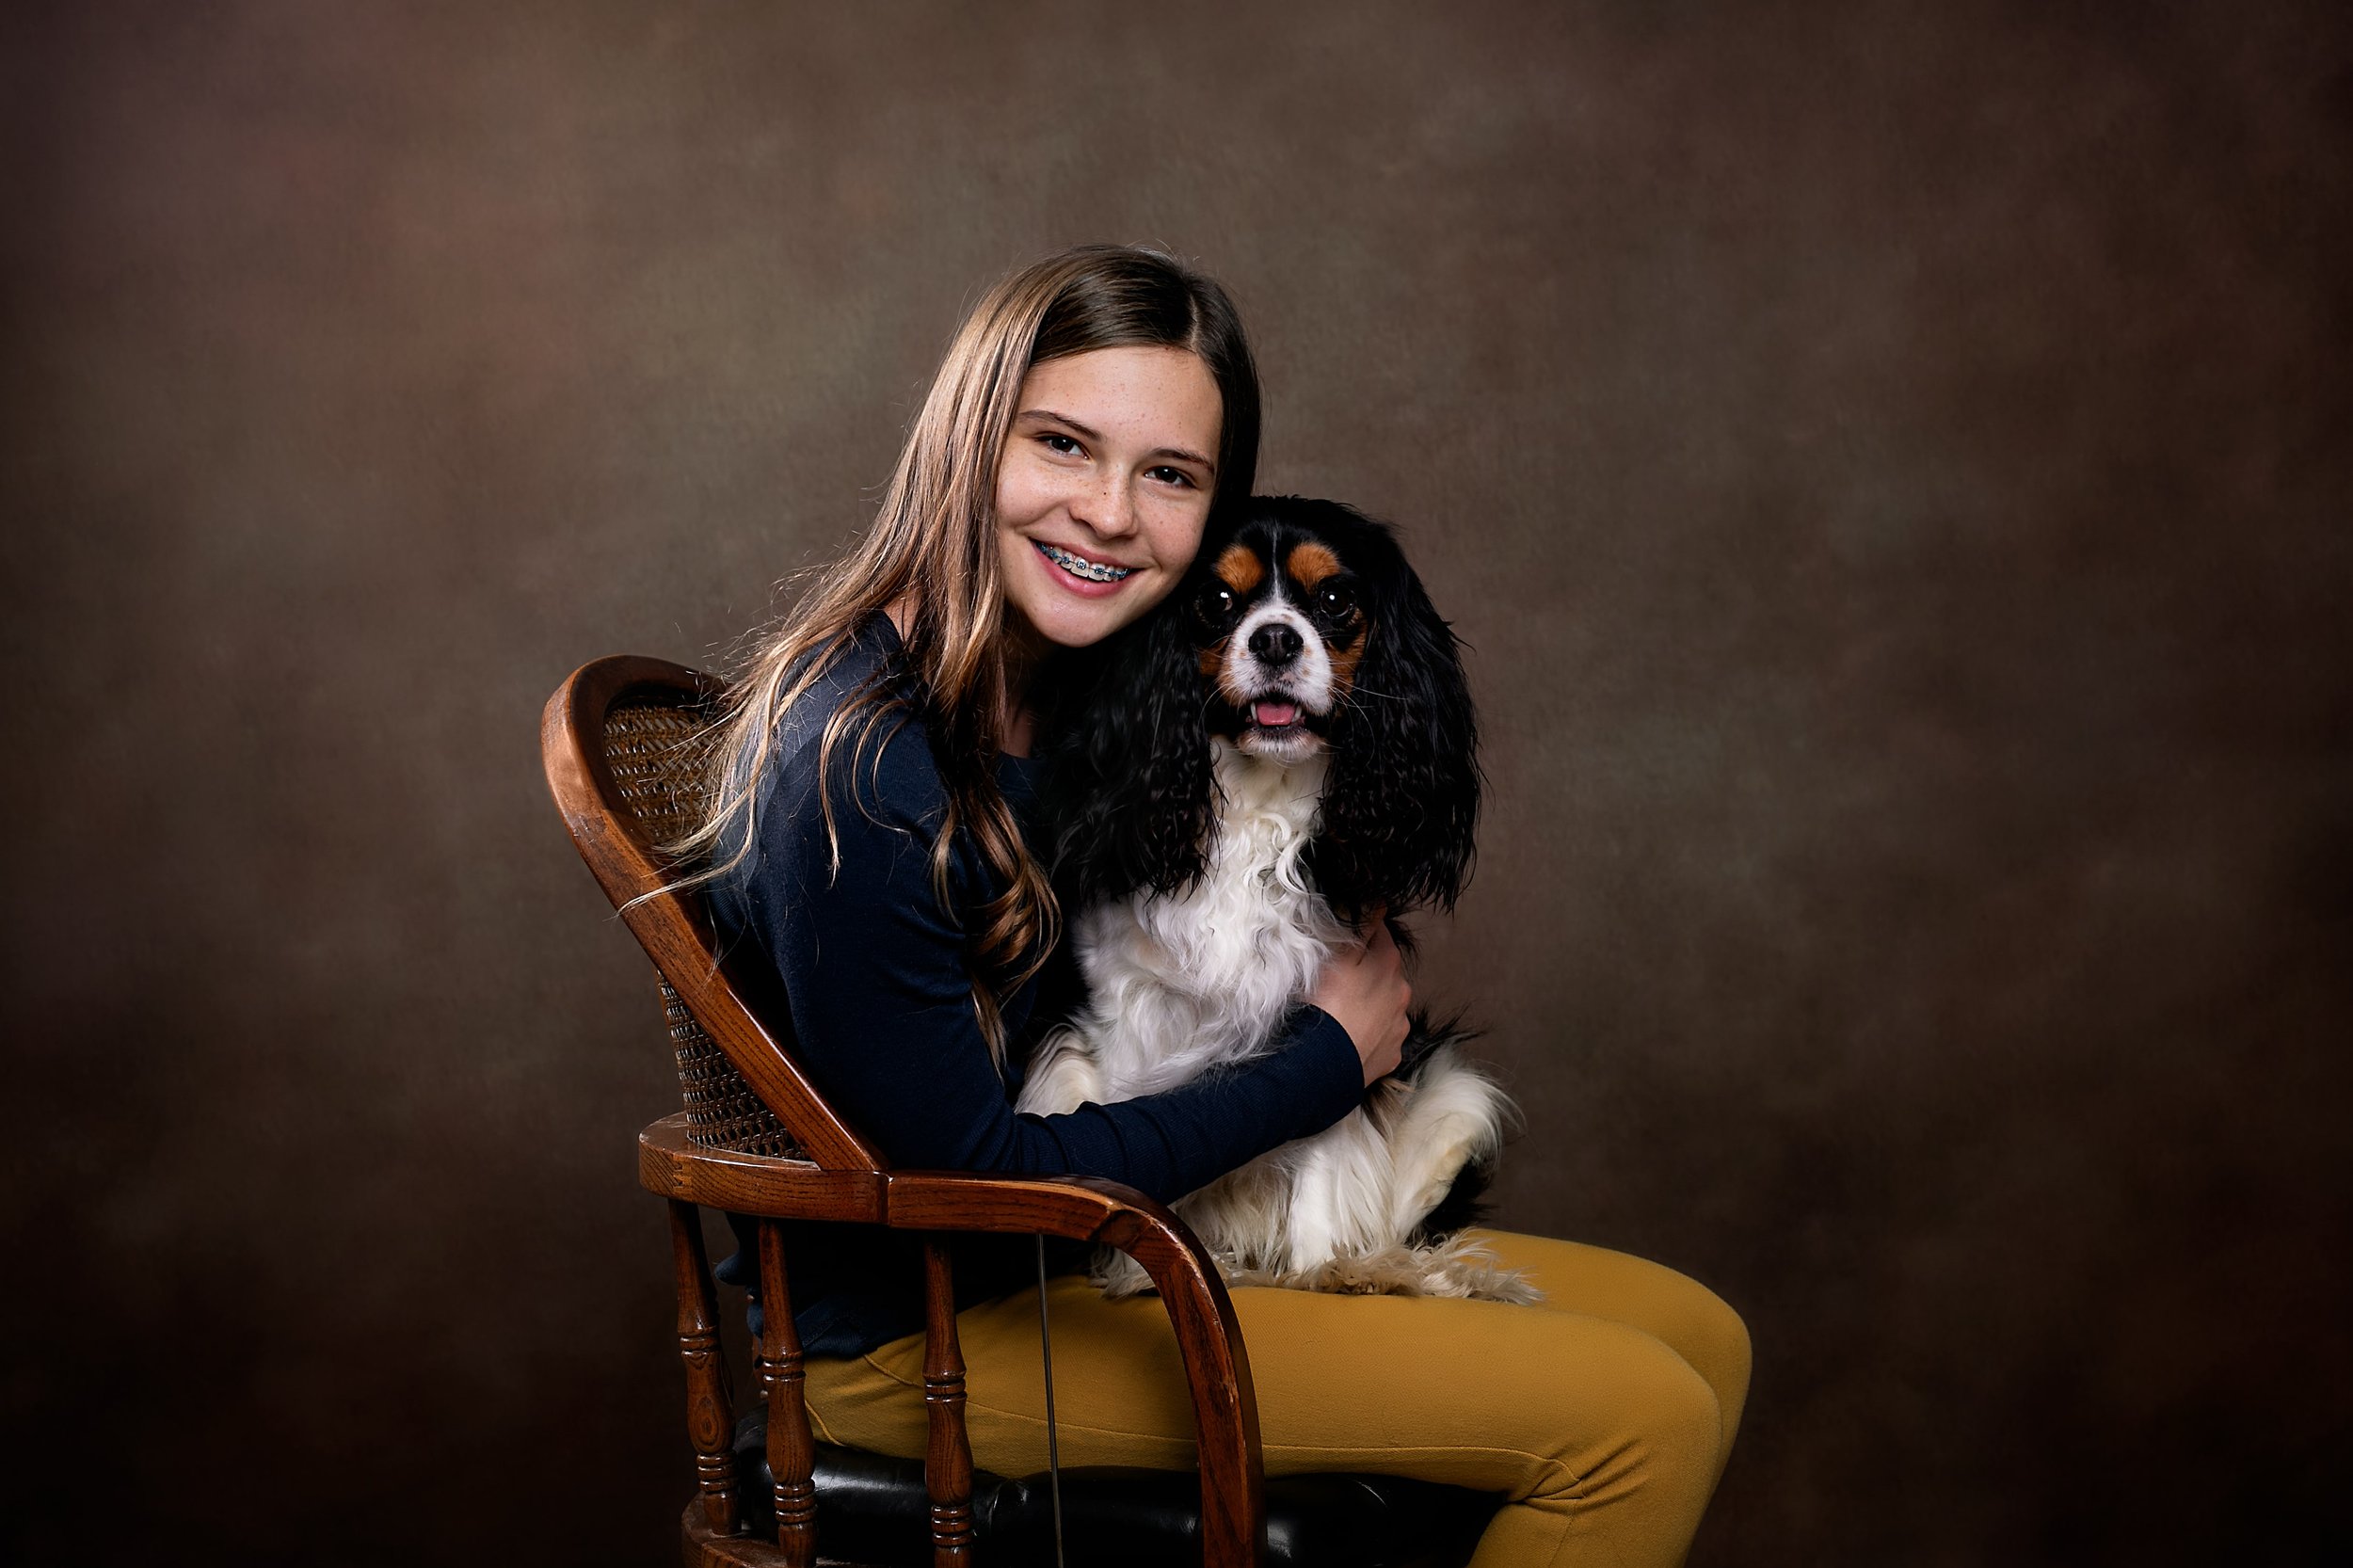 Angie Perisse - Portfolio - Looks that express the soul - Photography Session for Kids, Pets, Horses, Family and Studio in Vernon, Texas, USA.